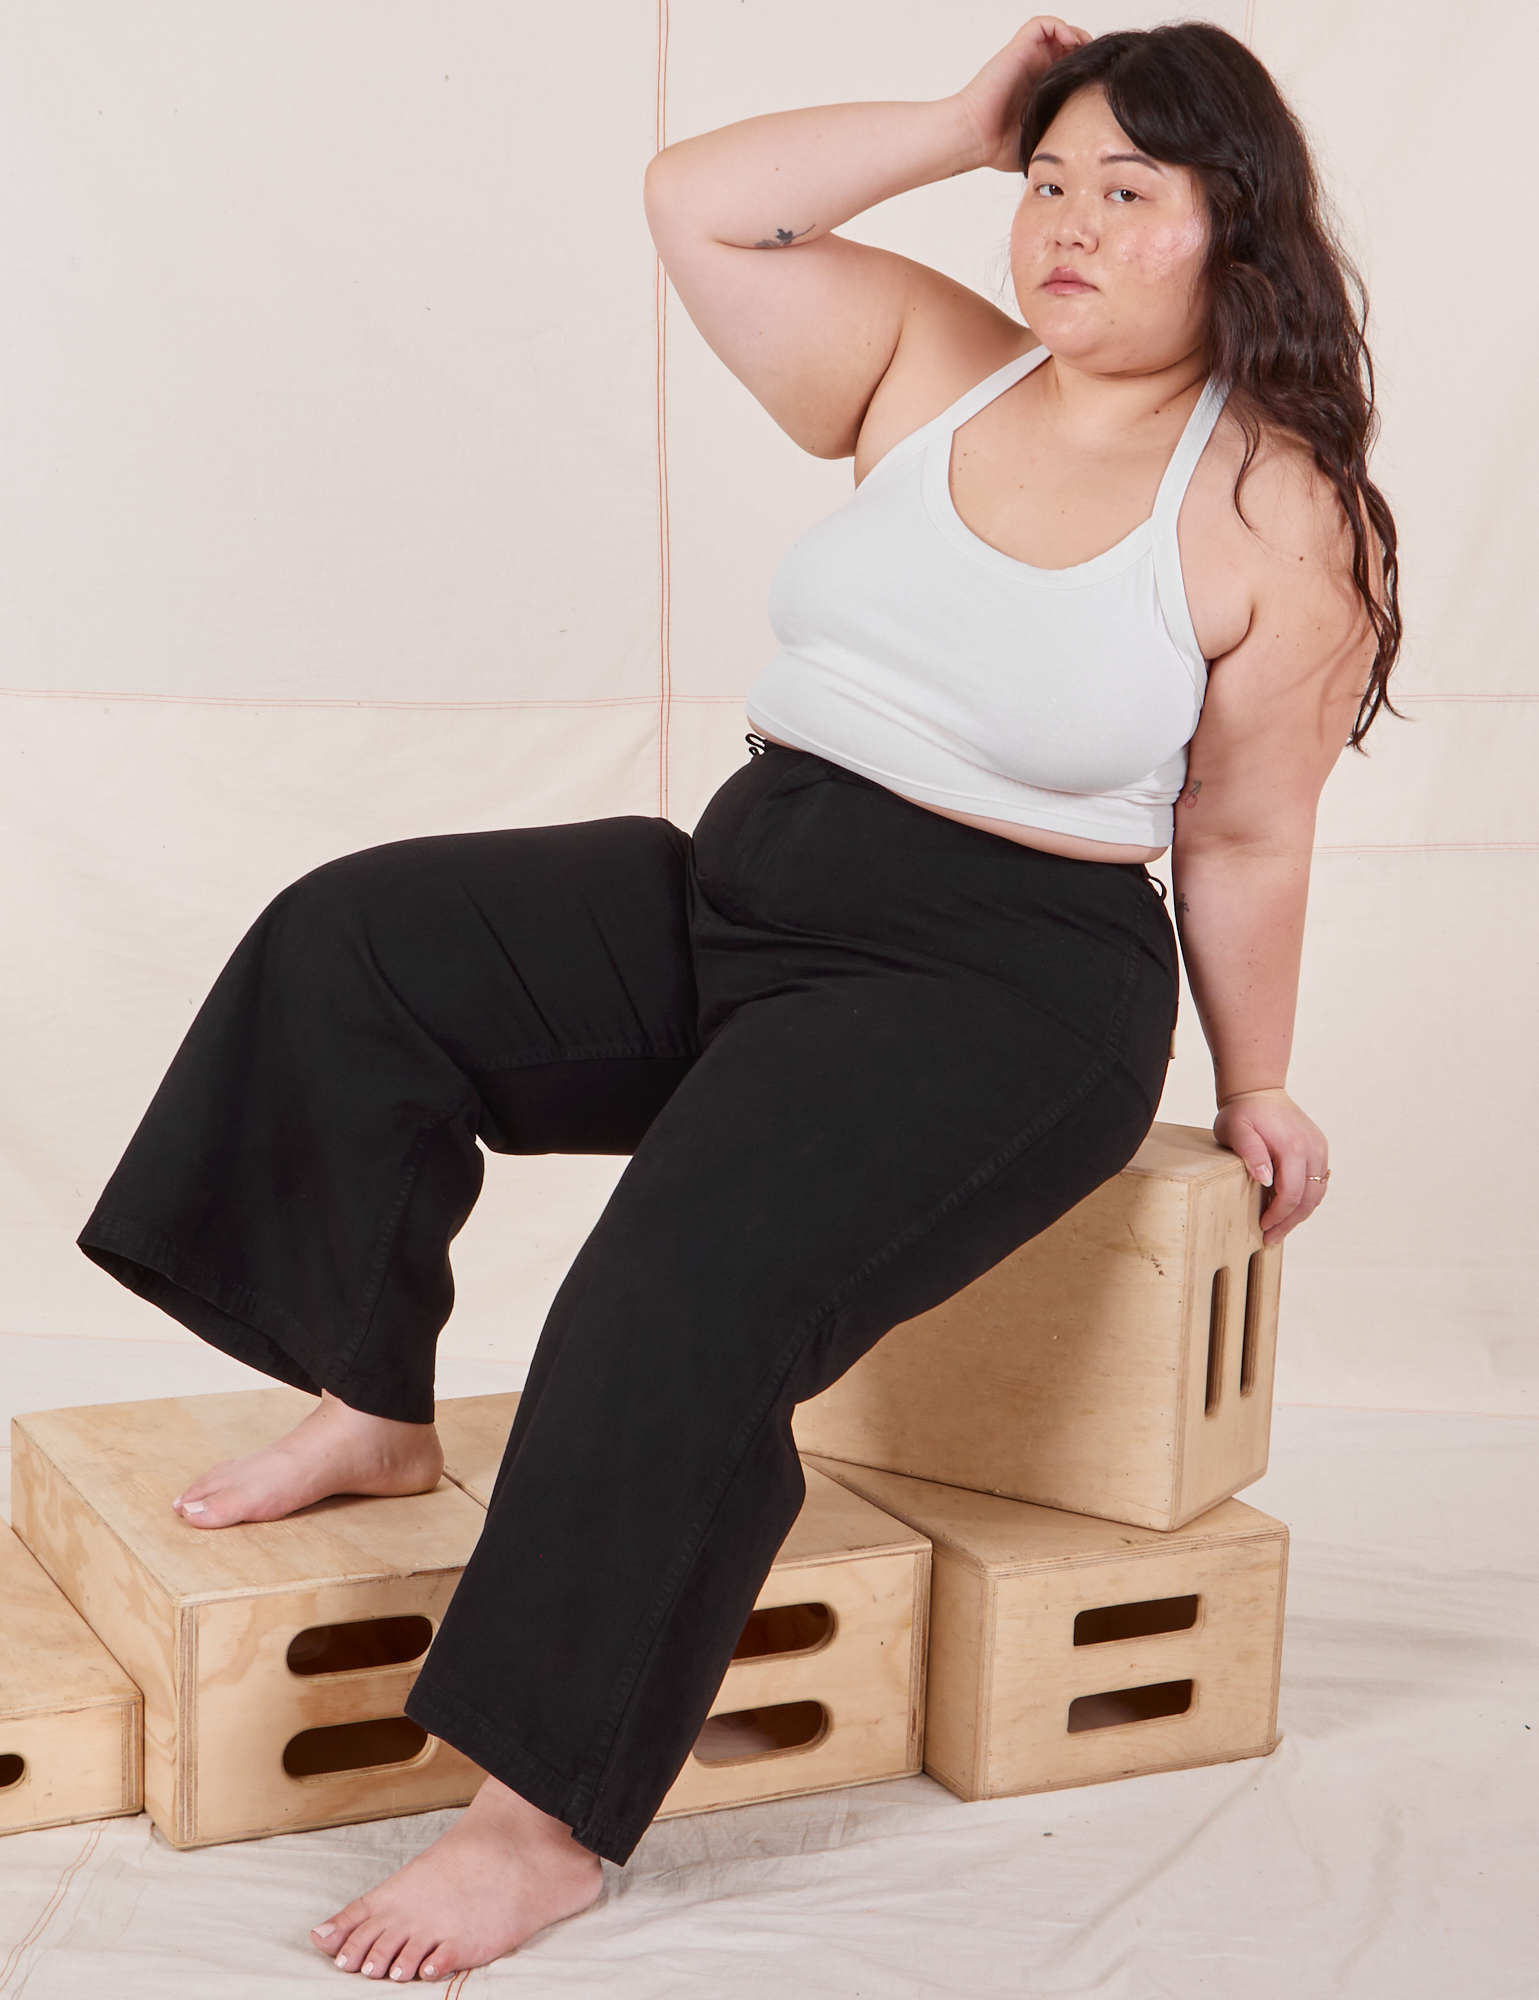 Ashley is wearing Petite Bell Bottoms in Basic Black and vintage off-white Halter Top.